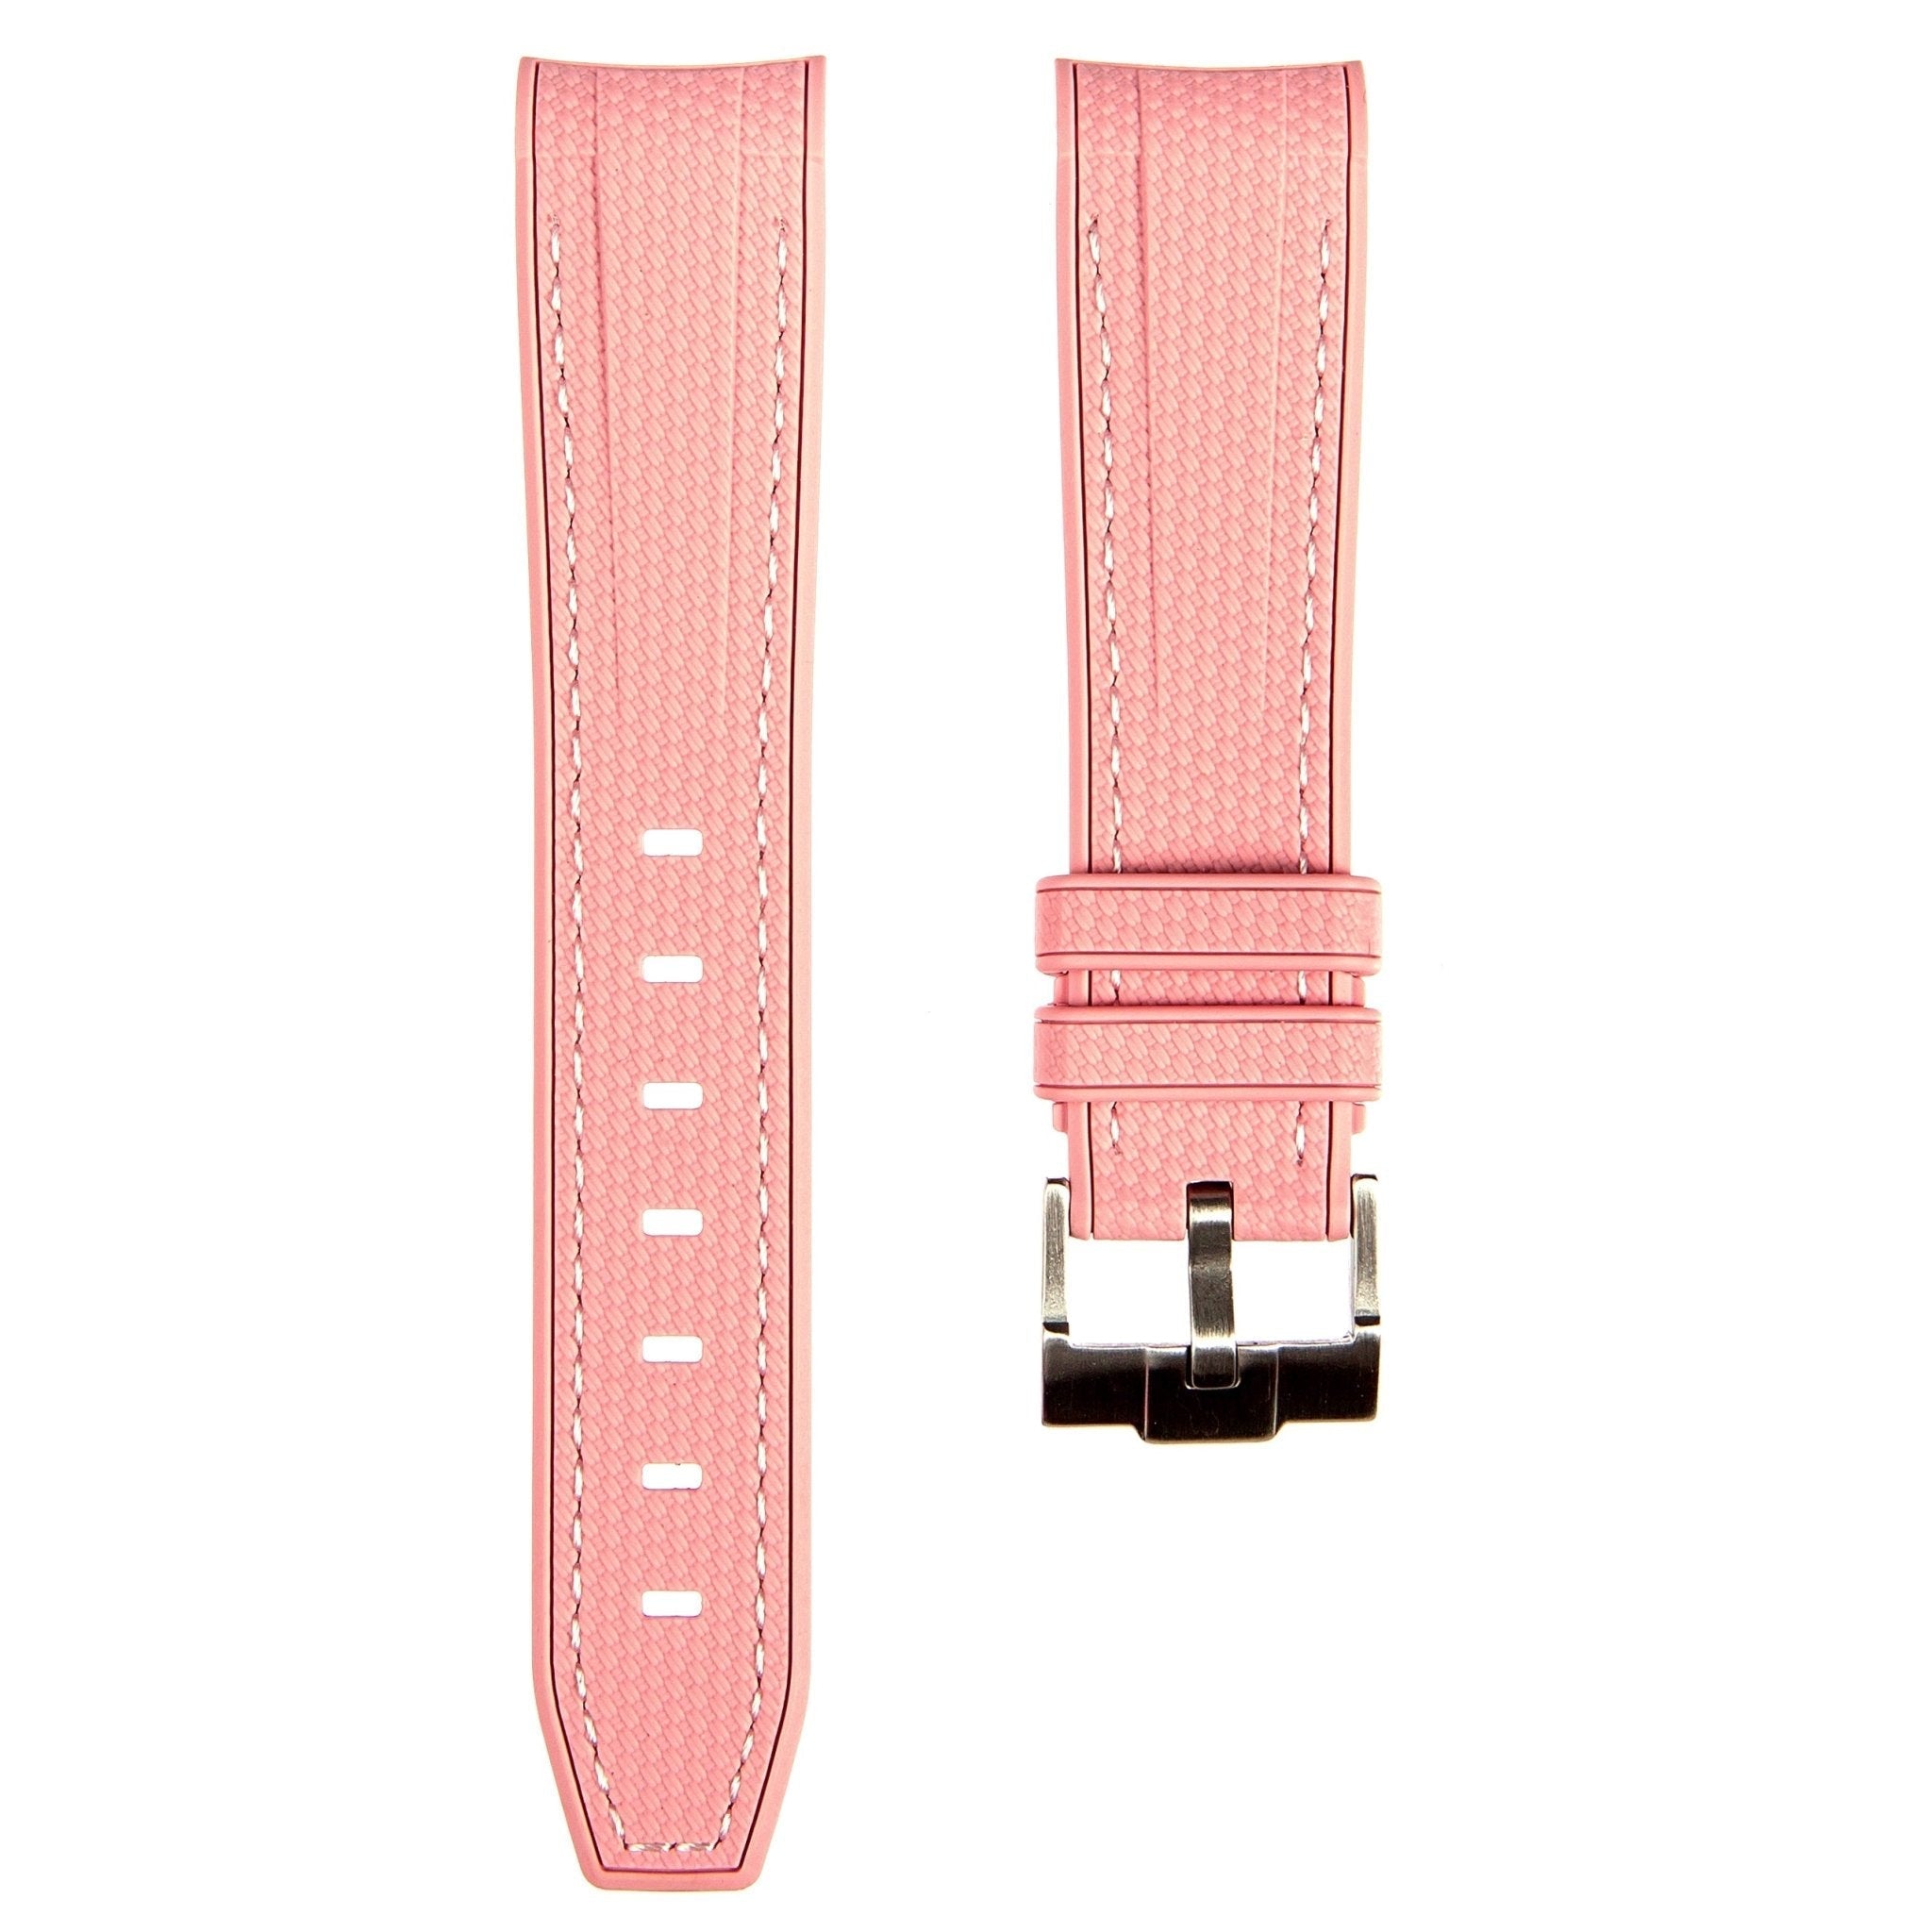 Textured Curved End Premium Silicone Strap – Compatible with Rolex Submariner – Light Pink (2405) -StrapSeeker